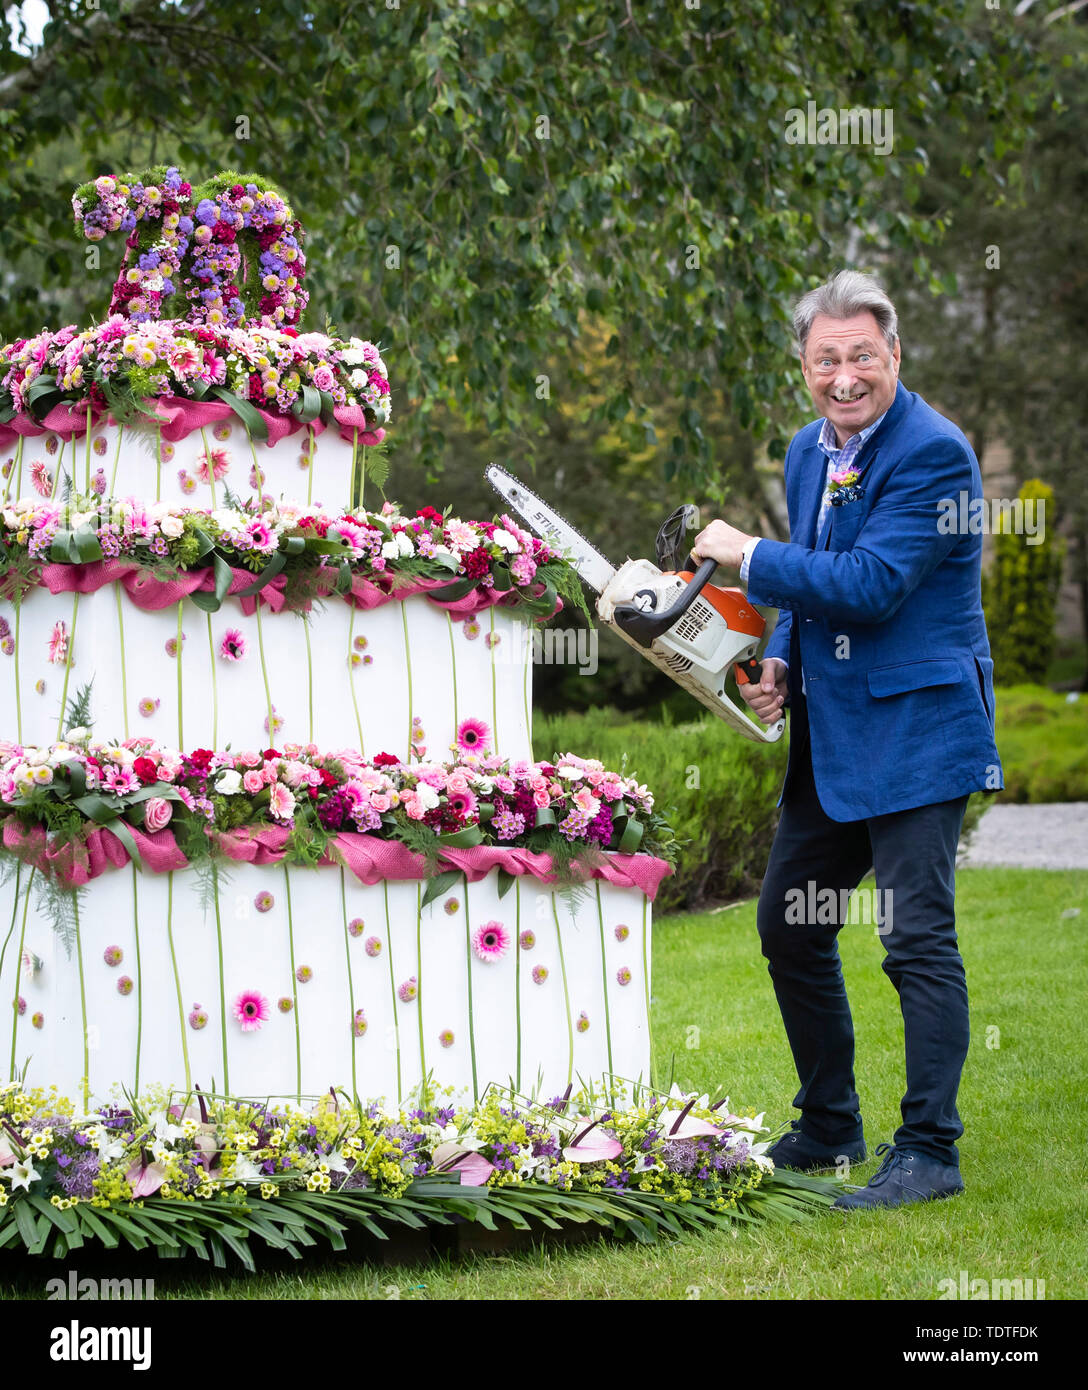 TV gardener Alan Titchmarsh pretends to cut giant three-tiered floral birthday cake with a chainsaw to mark 70 years of the RHS Garden Harlow Carr, during the RHS Garden Harlow Carr Flower